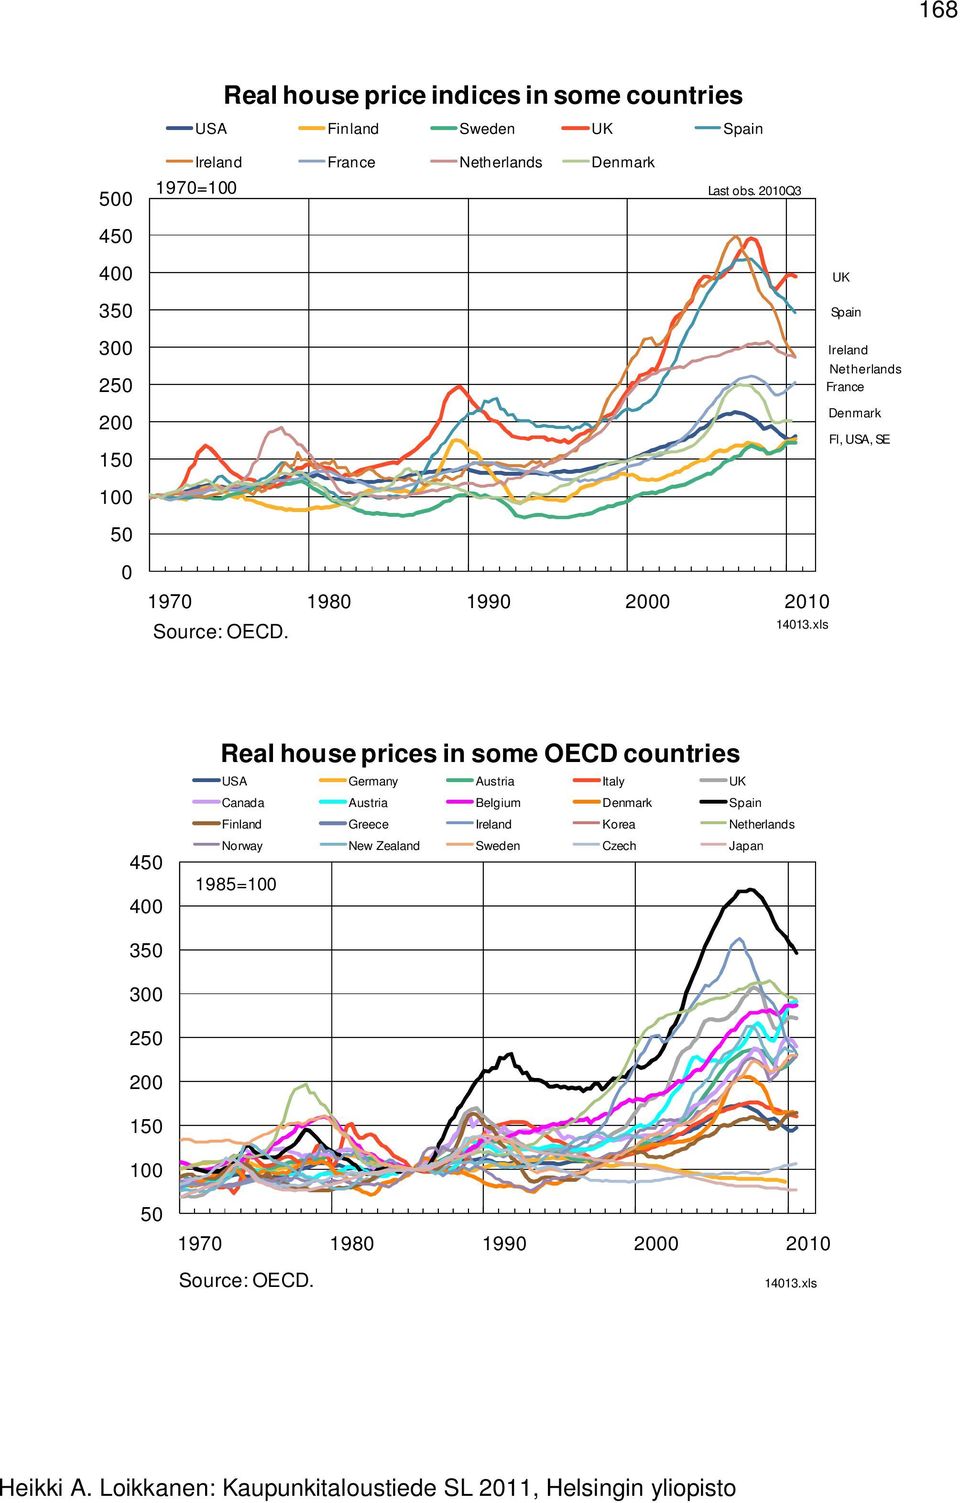 xls UK Spain Ireland Netherlands France Denmark FI, USA, SE 45 4 Real house prices in some OECD countries USA Germany Austria Italy UK Canada